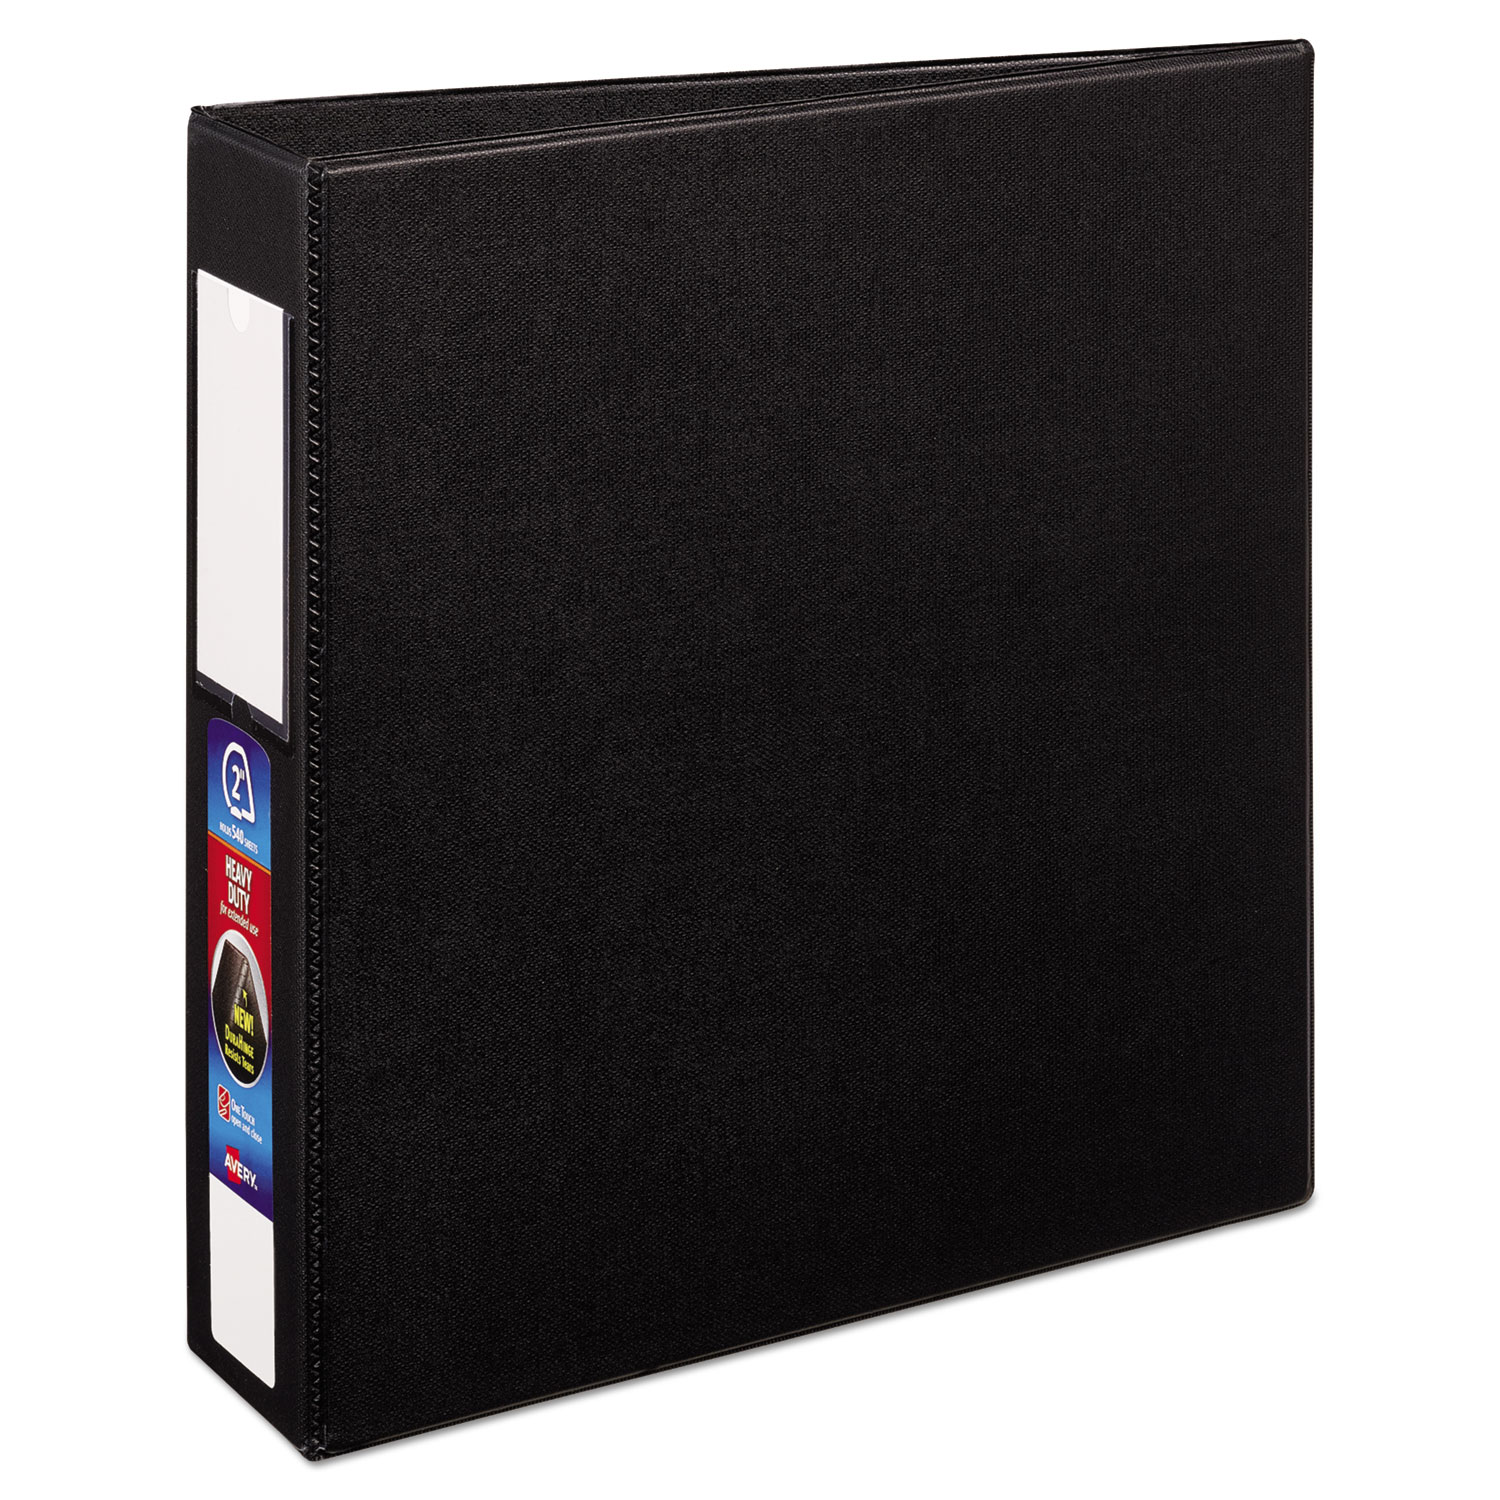  Avery 79992 Heavy-Duty Non-View Binder with DuraHinge and Locking One Touch EZD Rings, 3 Rings, 2 Capacity, 11 x 8.5, Black (AVE79992) 